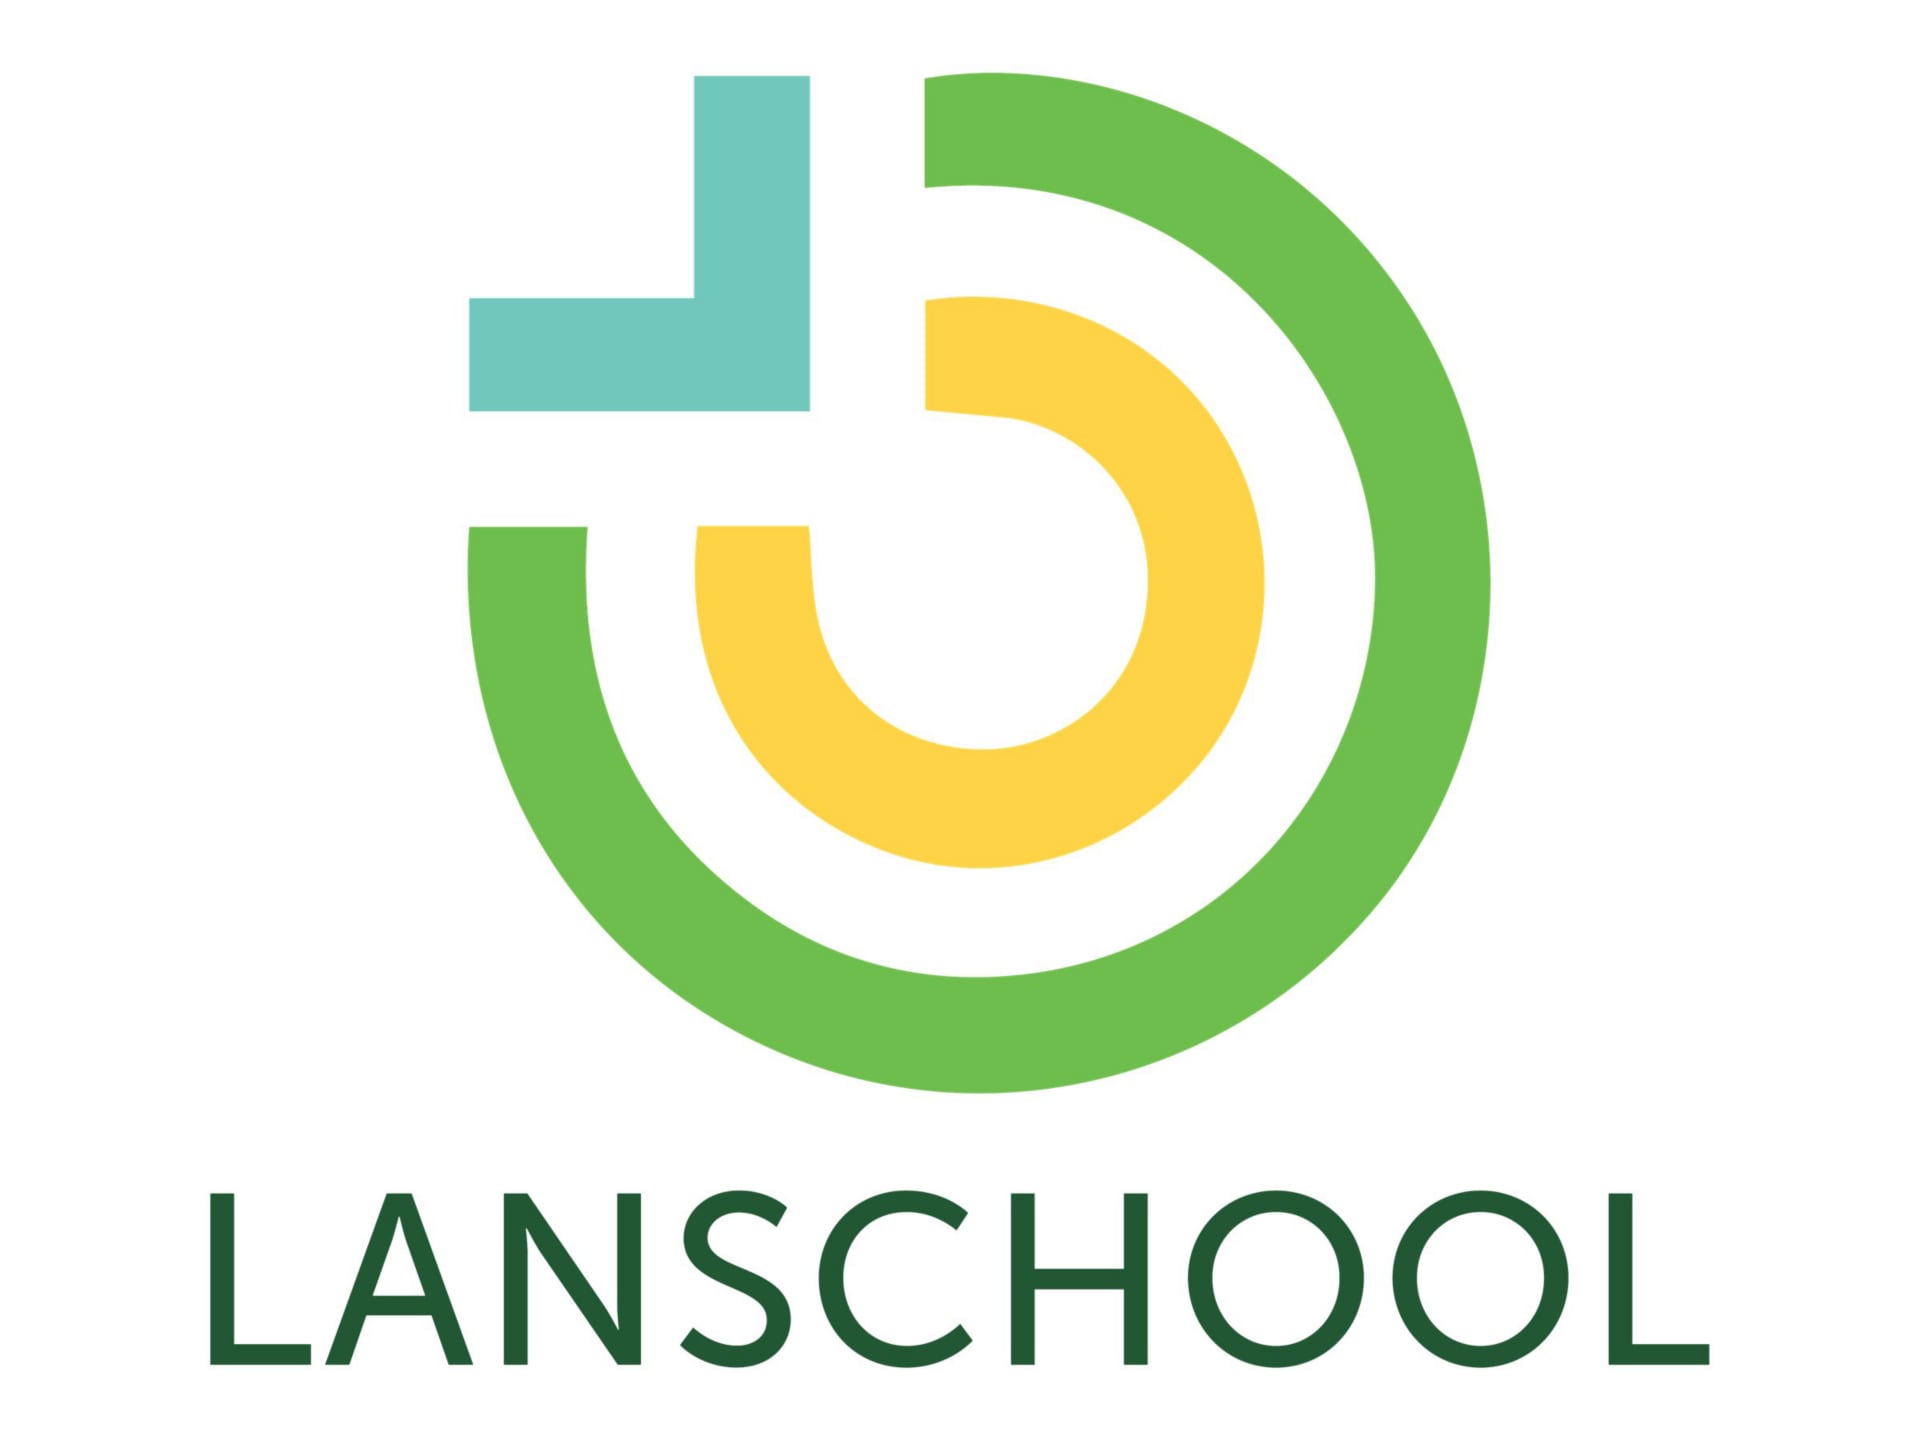 LanSchool - subscription license (6 months) + Technical Support - 1 device